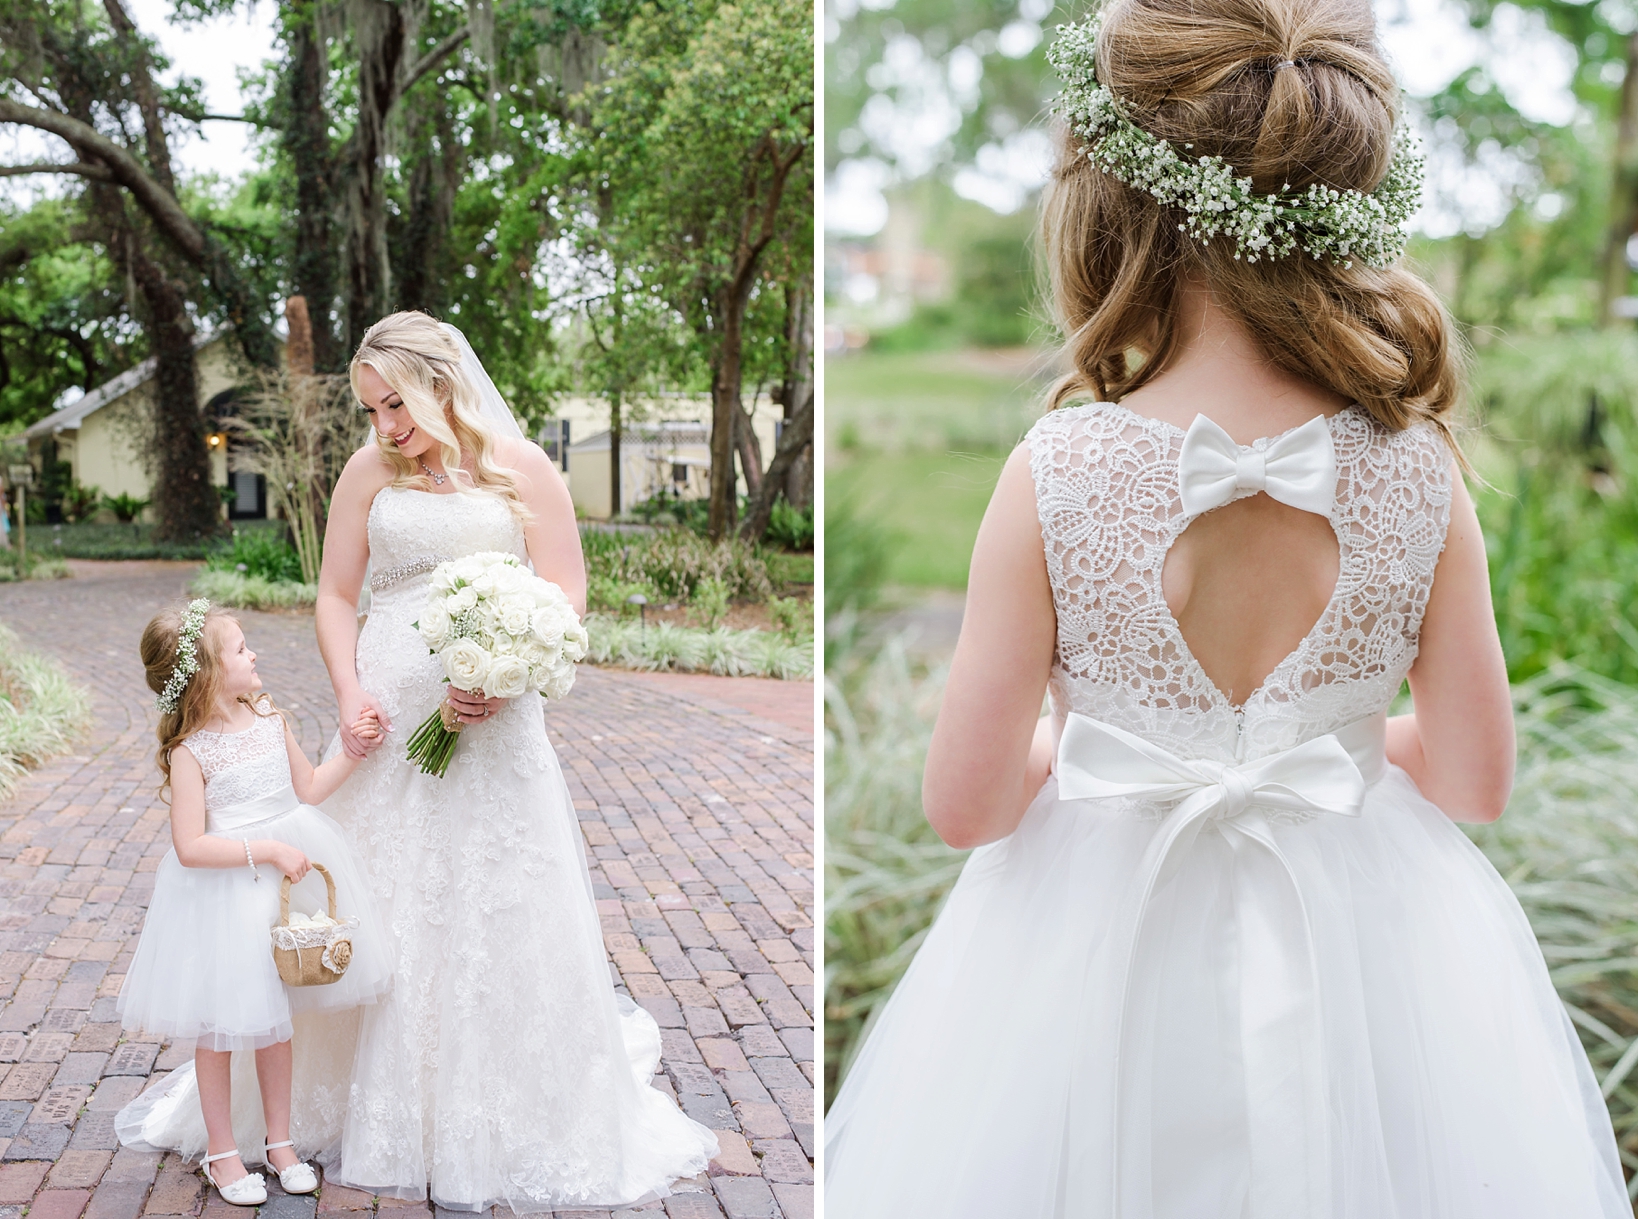 Bride and her flower girl on a brick path